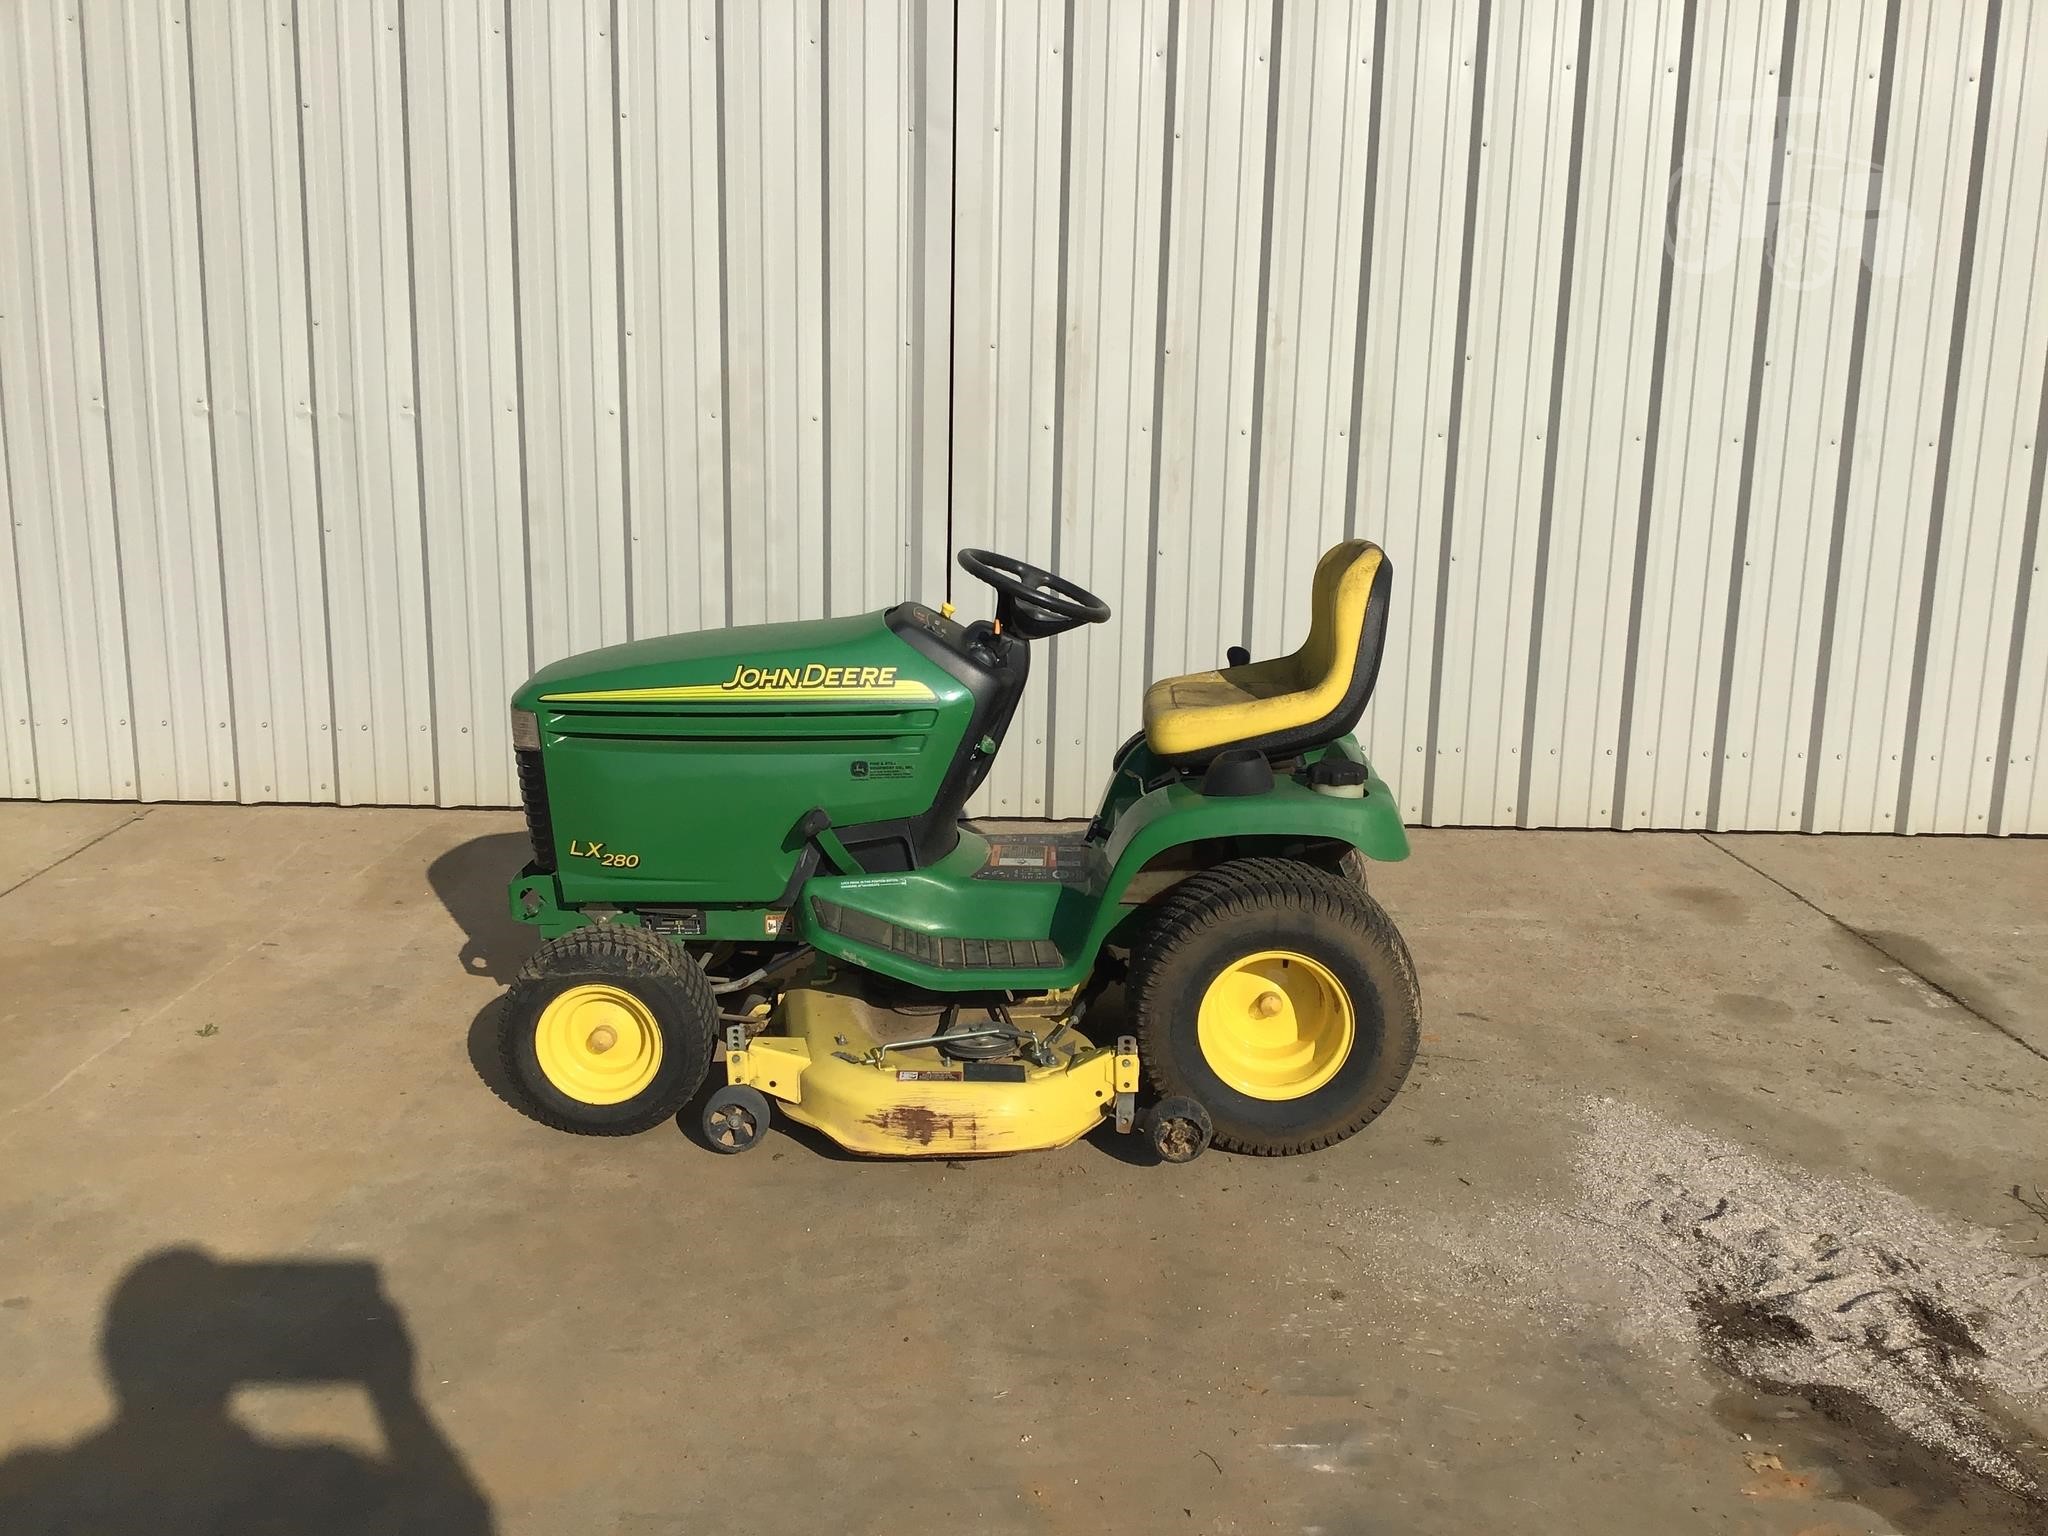 John Deere Lx280 For Sale 6 Listings Tractorhouse Com Page 1 Of 1